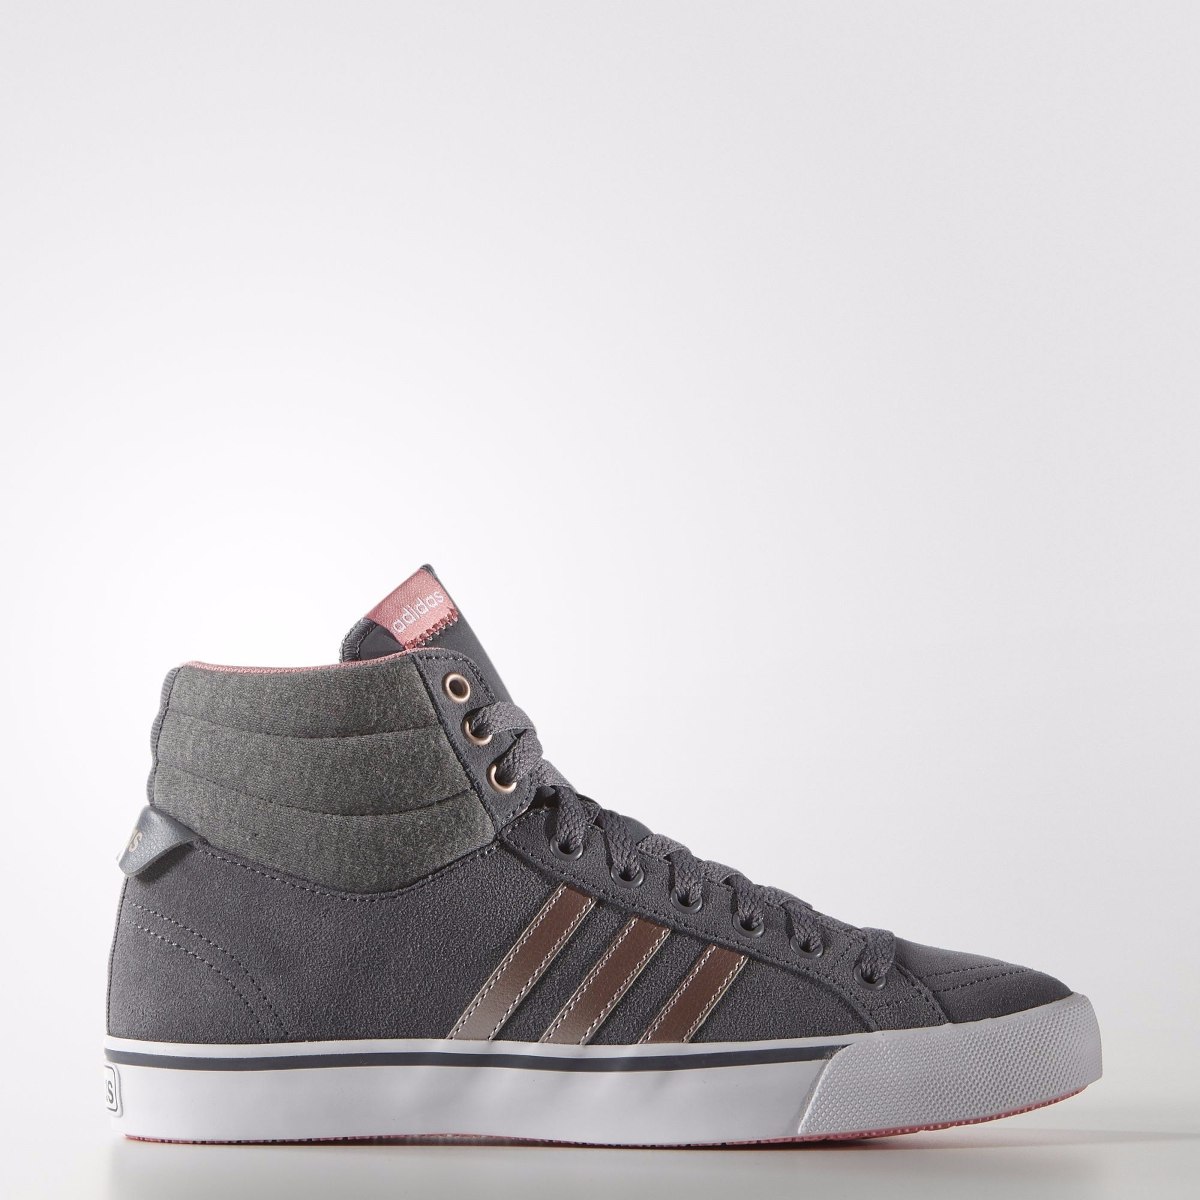 adidas neo gris y rosa > Clearance shop